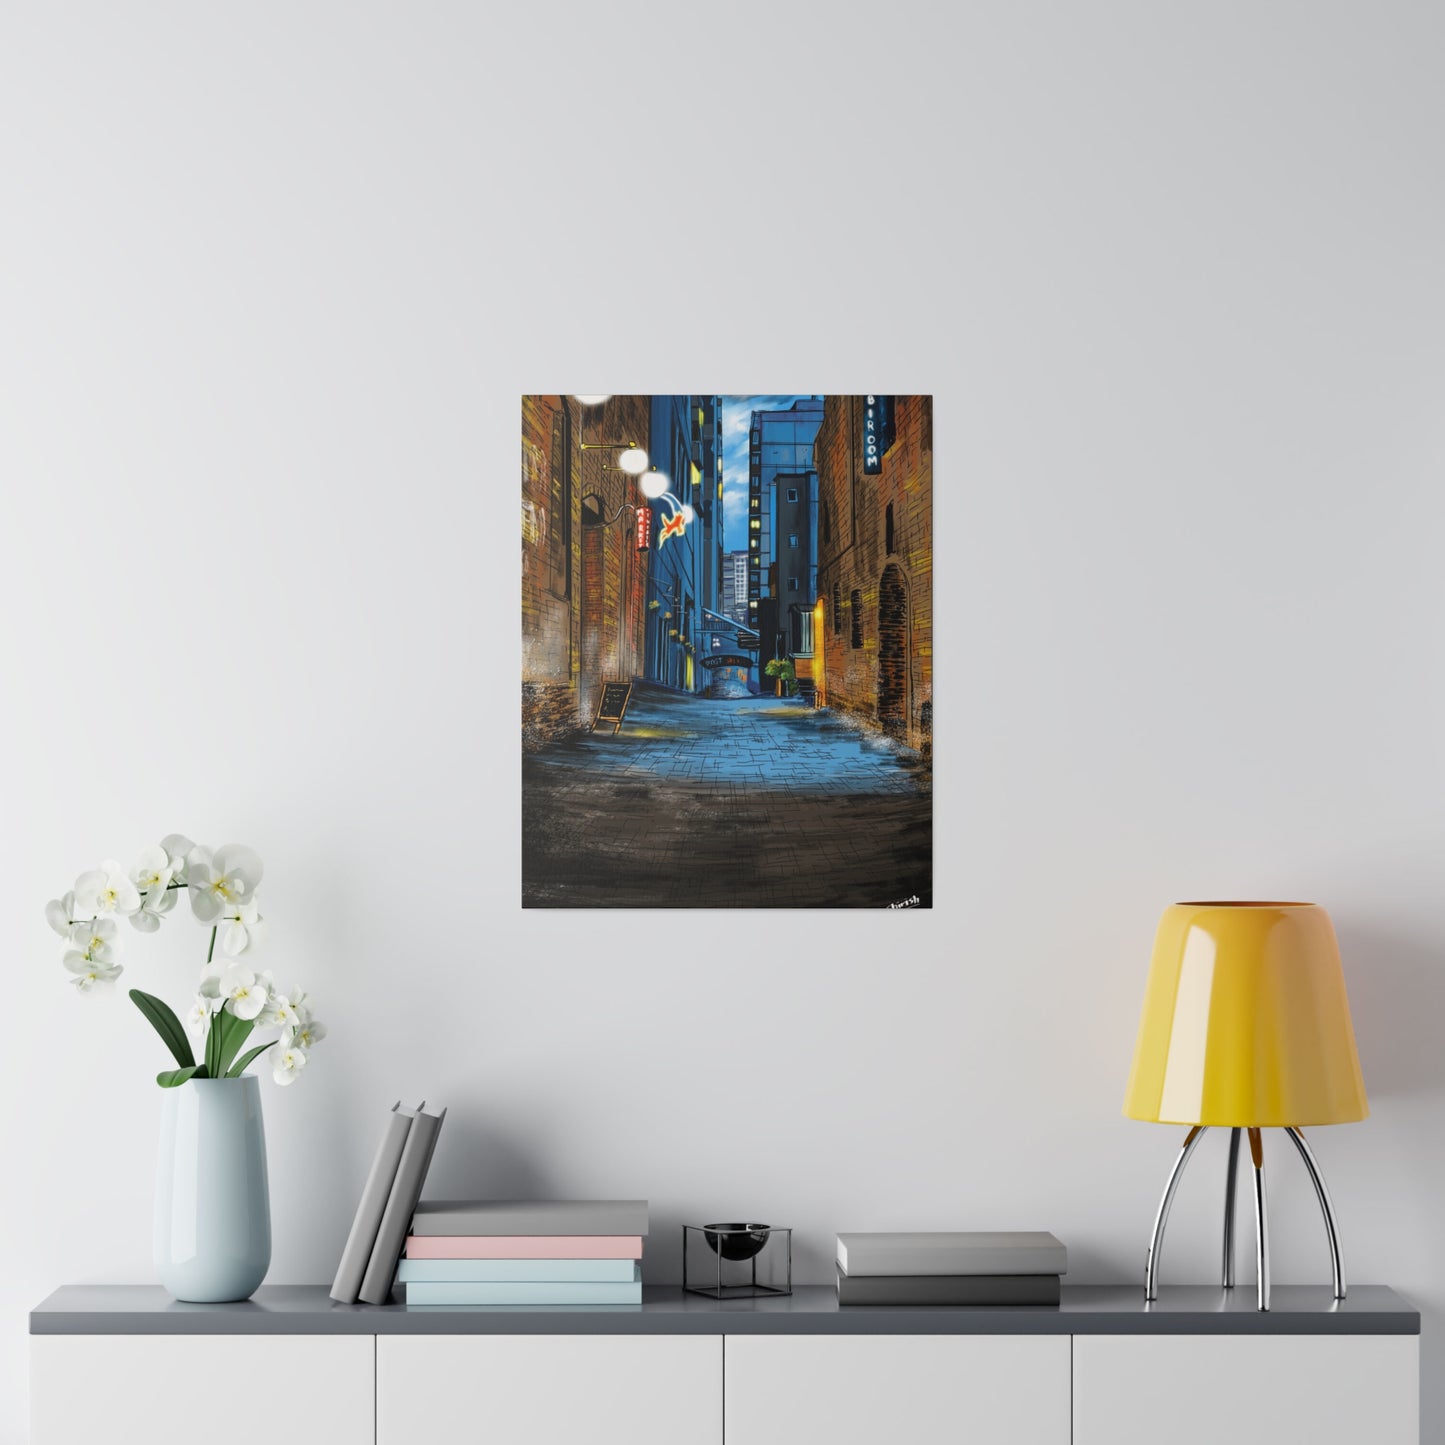 A Quiet Lane in a Busy City - Canvas Print